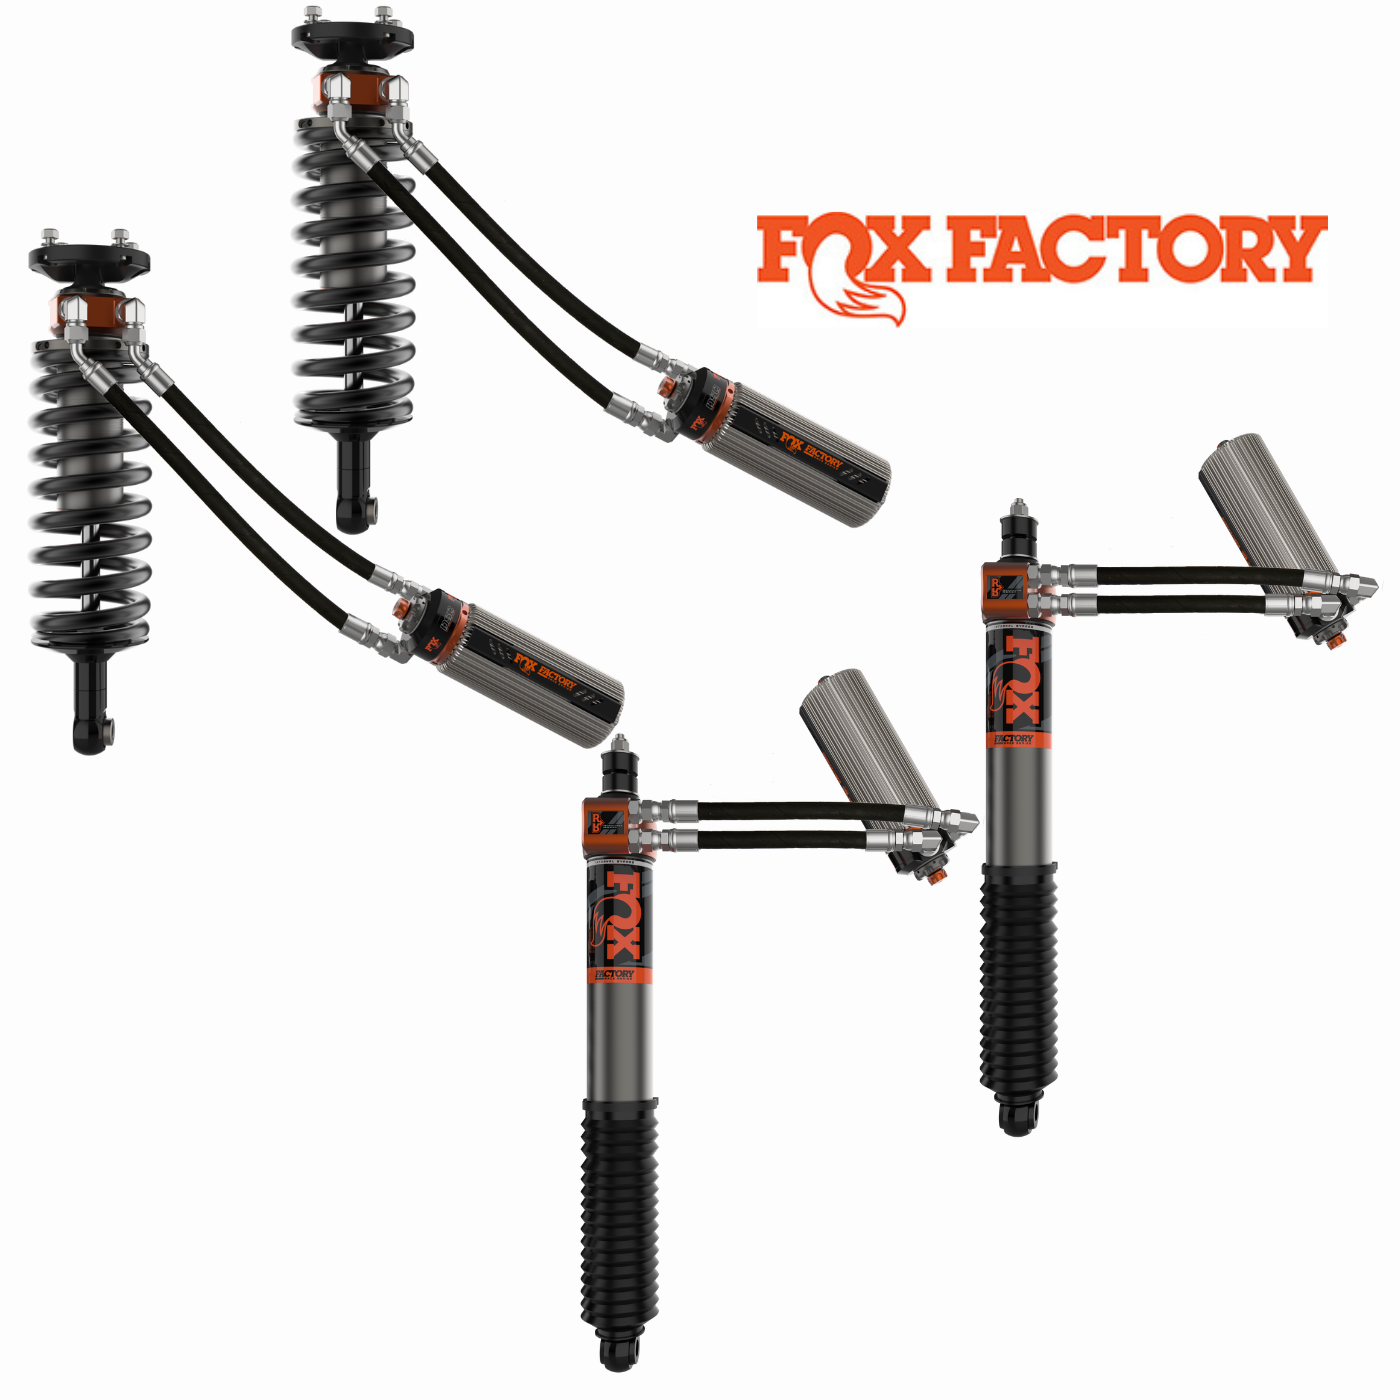 '22-24 Toyota Tundra FOX 3.0 FACTORY RACE RR Coilovers & Rear Shocks (1-2" Lift) w/ Upper Arms & Trailing Arm Combo Kit